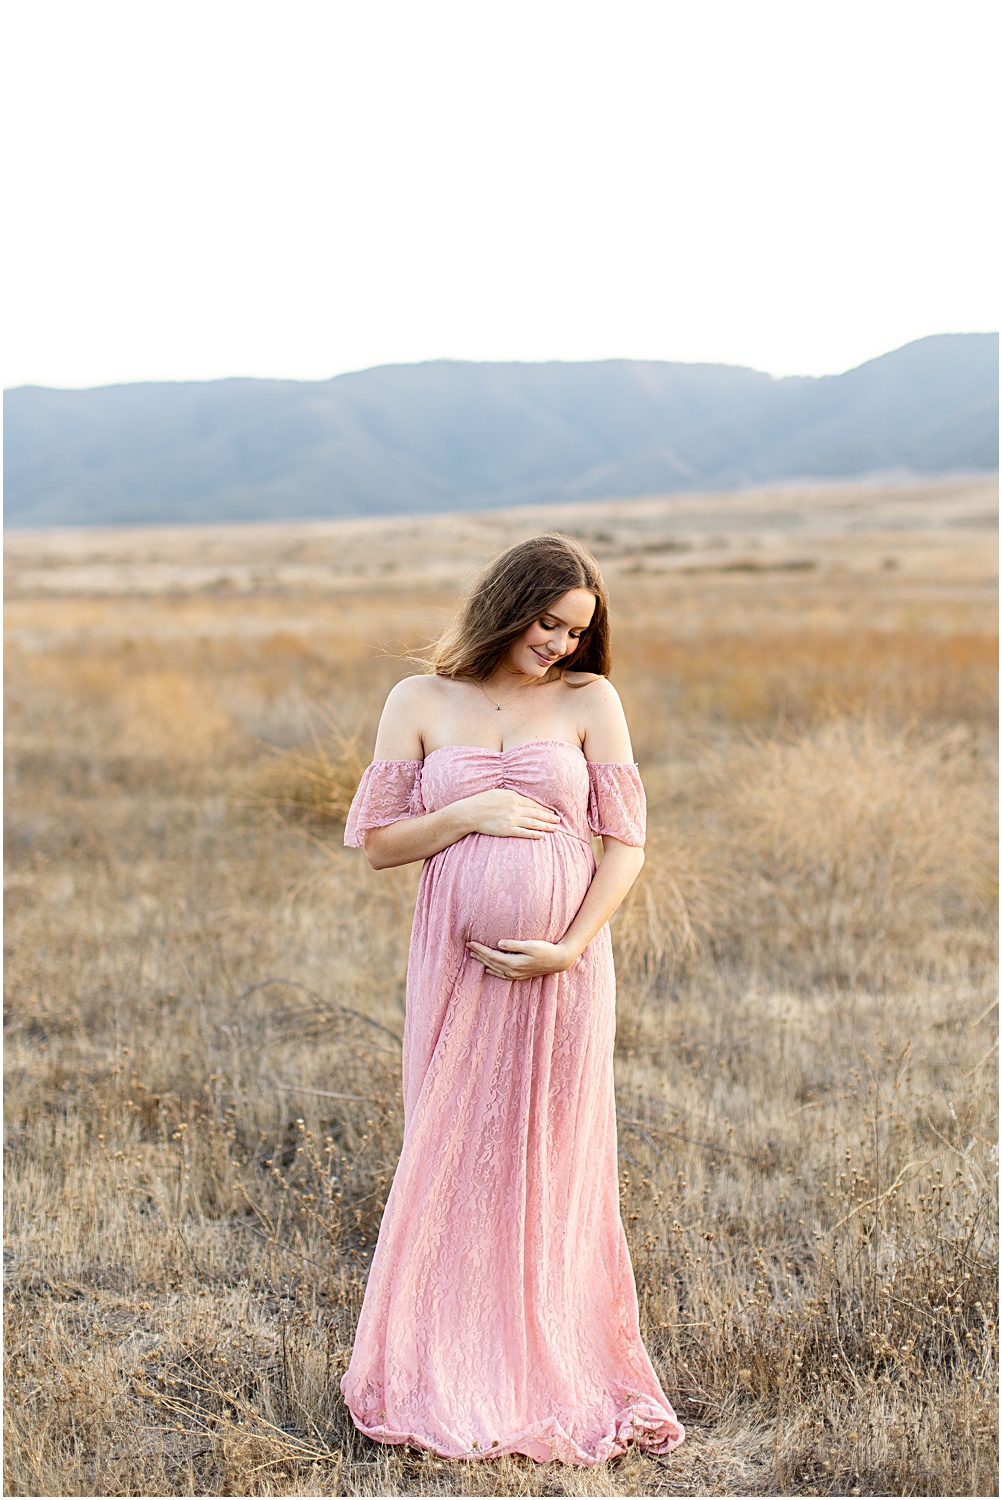 Maternity Photo Session Tips | Maternity photos, mommy-to-be in pink lace maxi dress